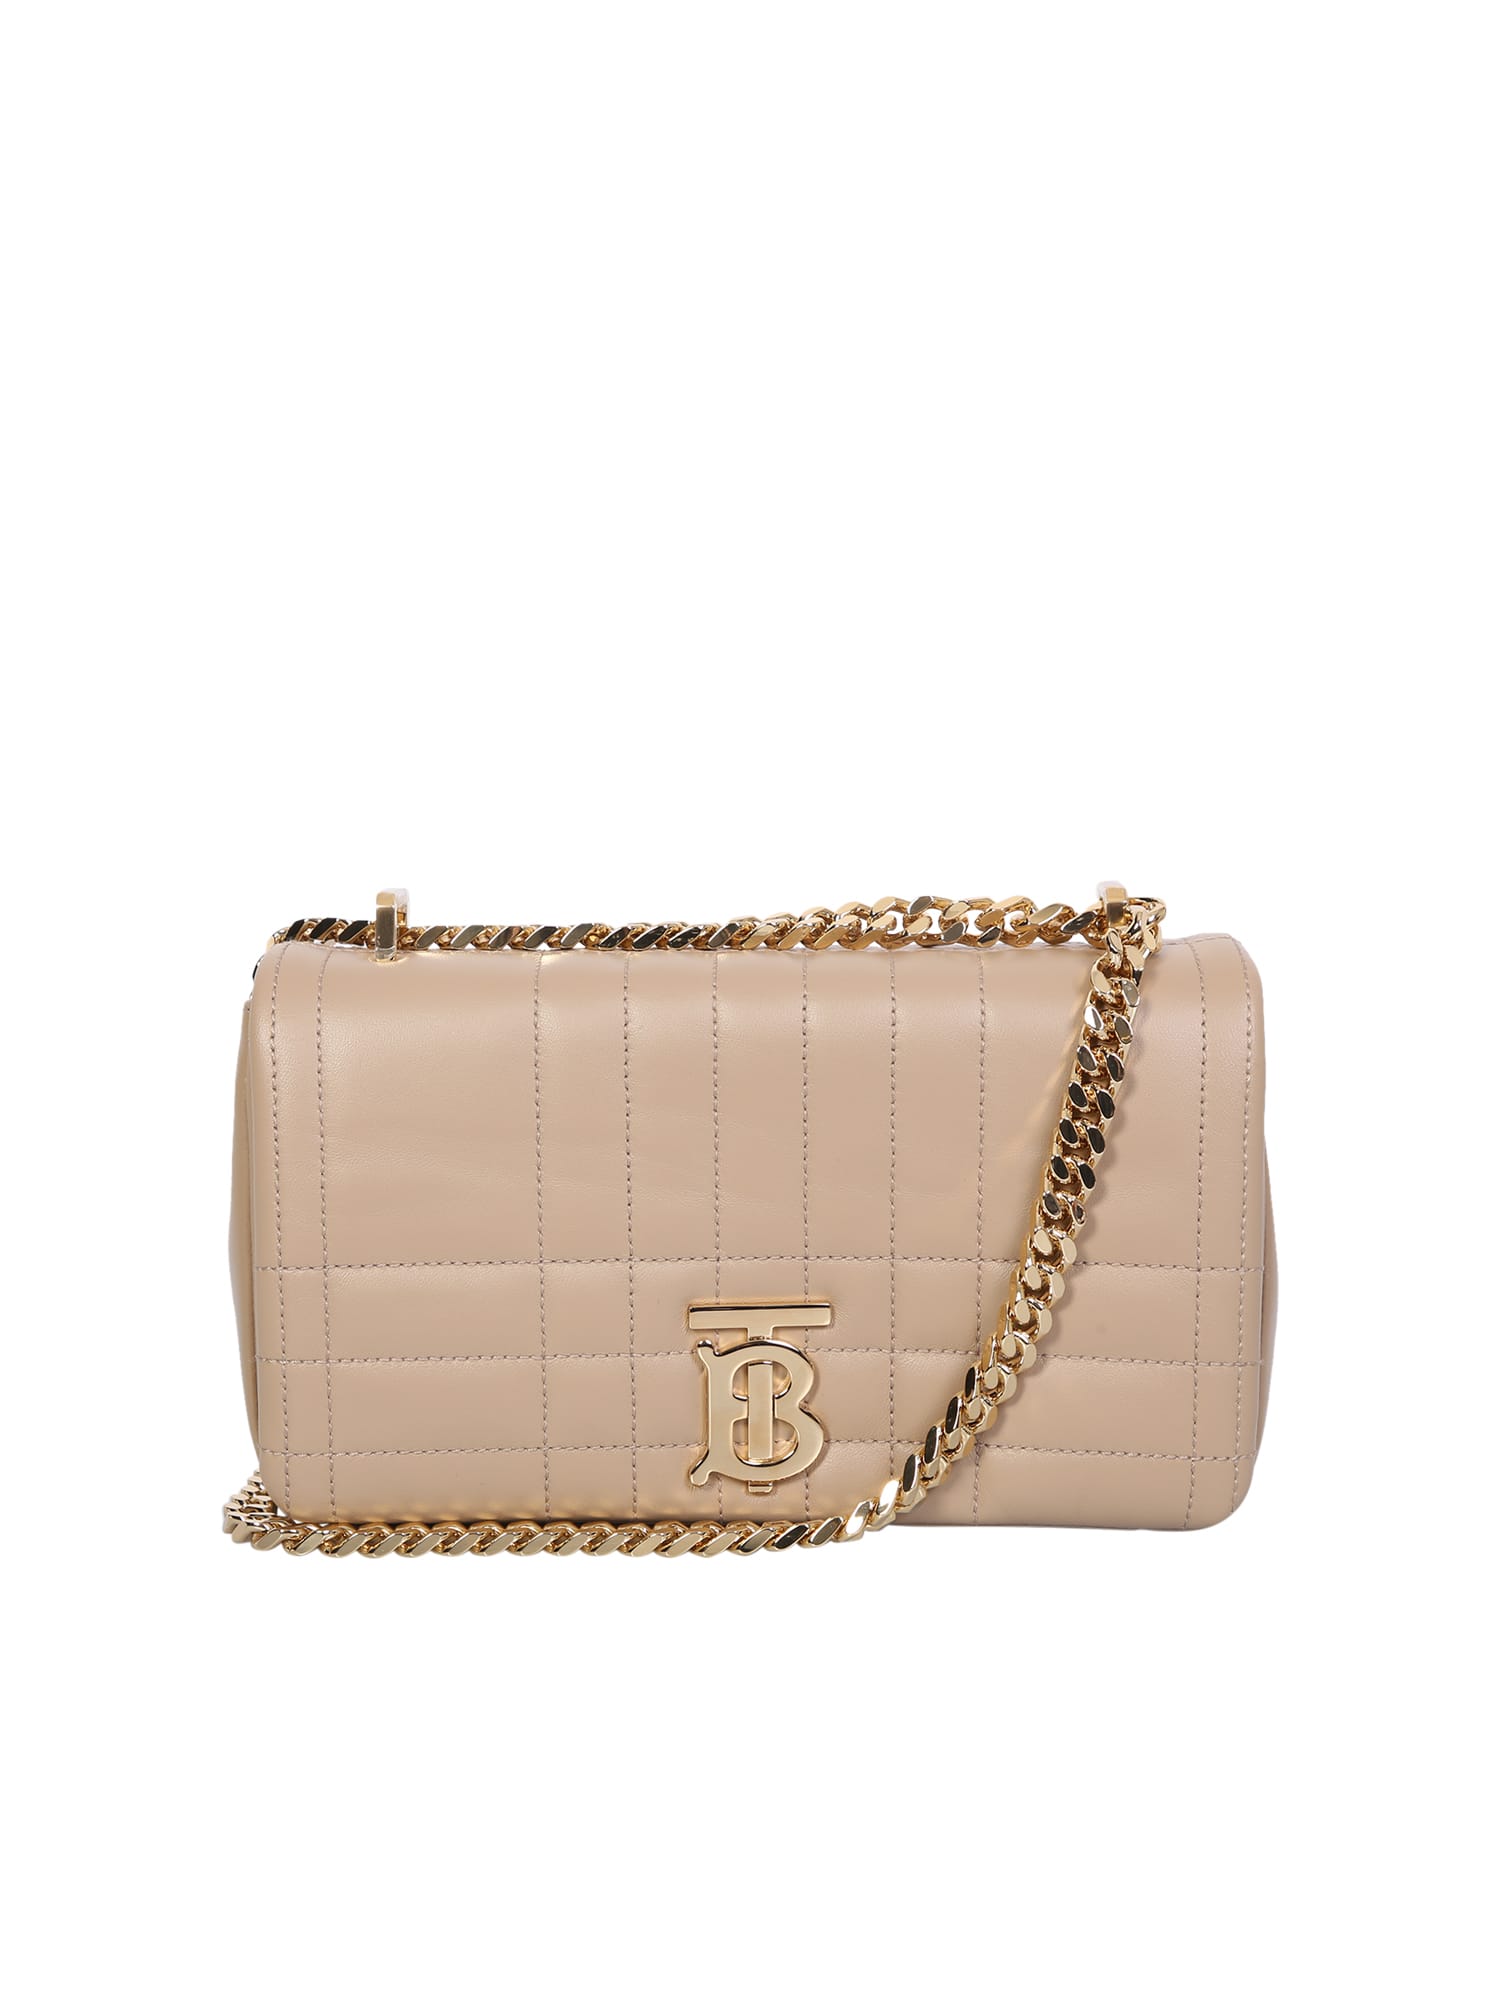 Burberry Quilted Lola Bag